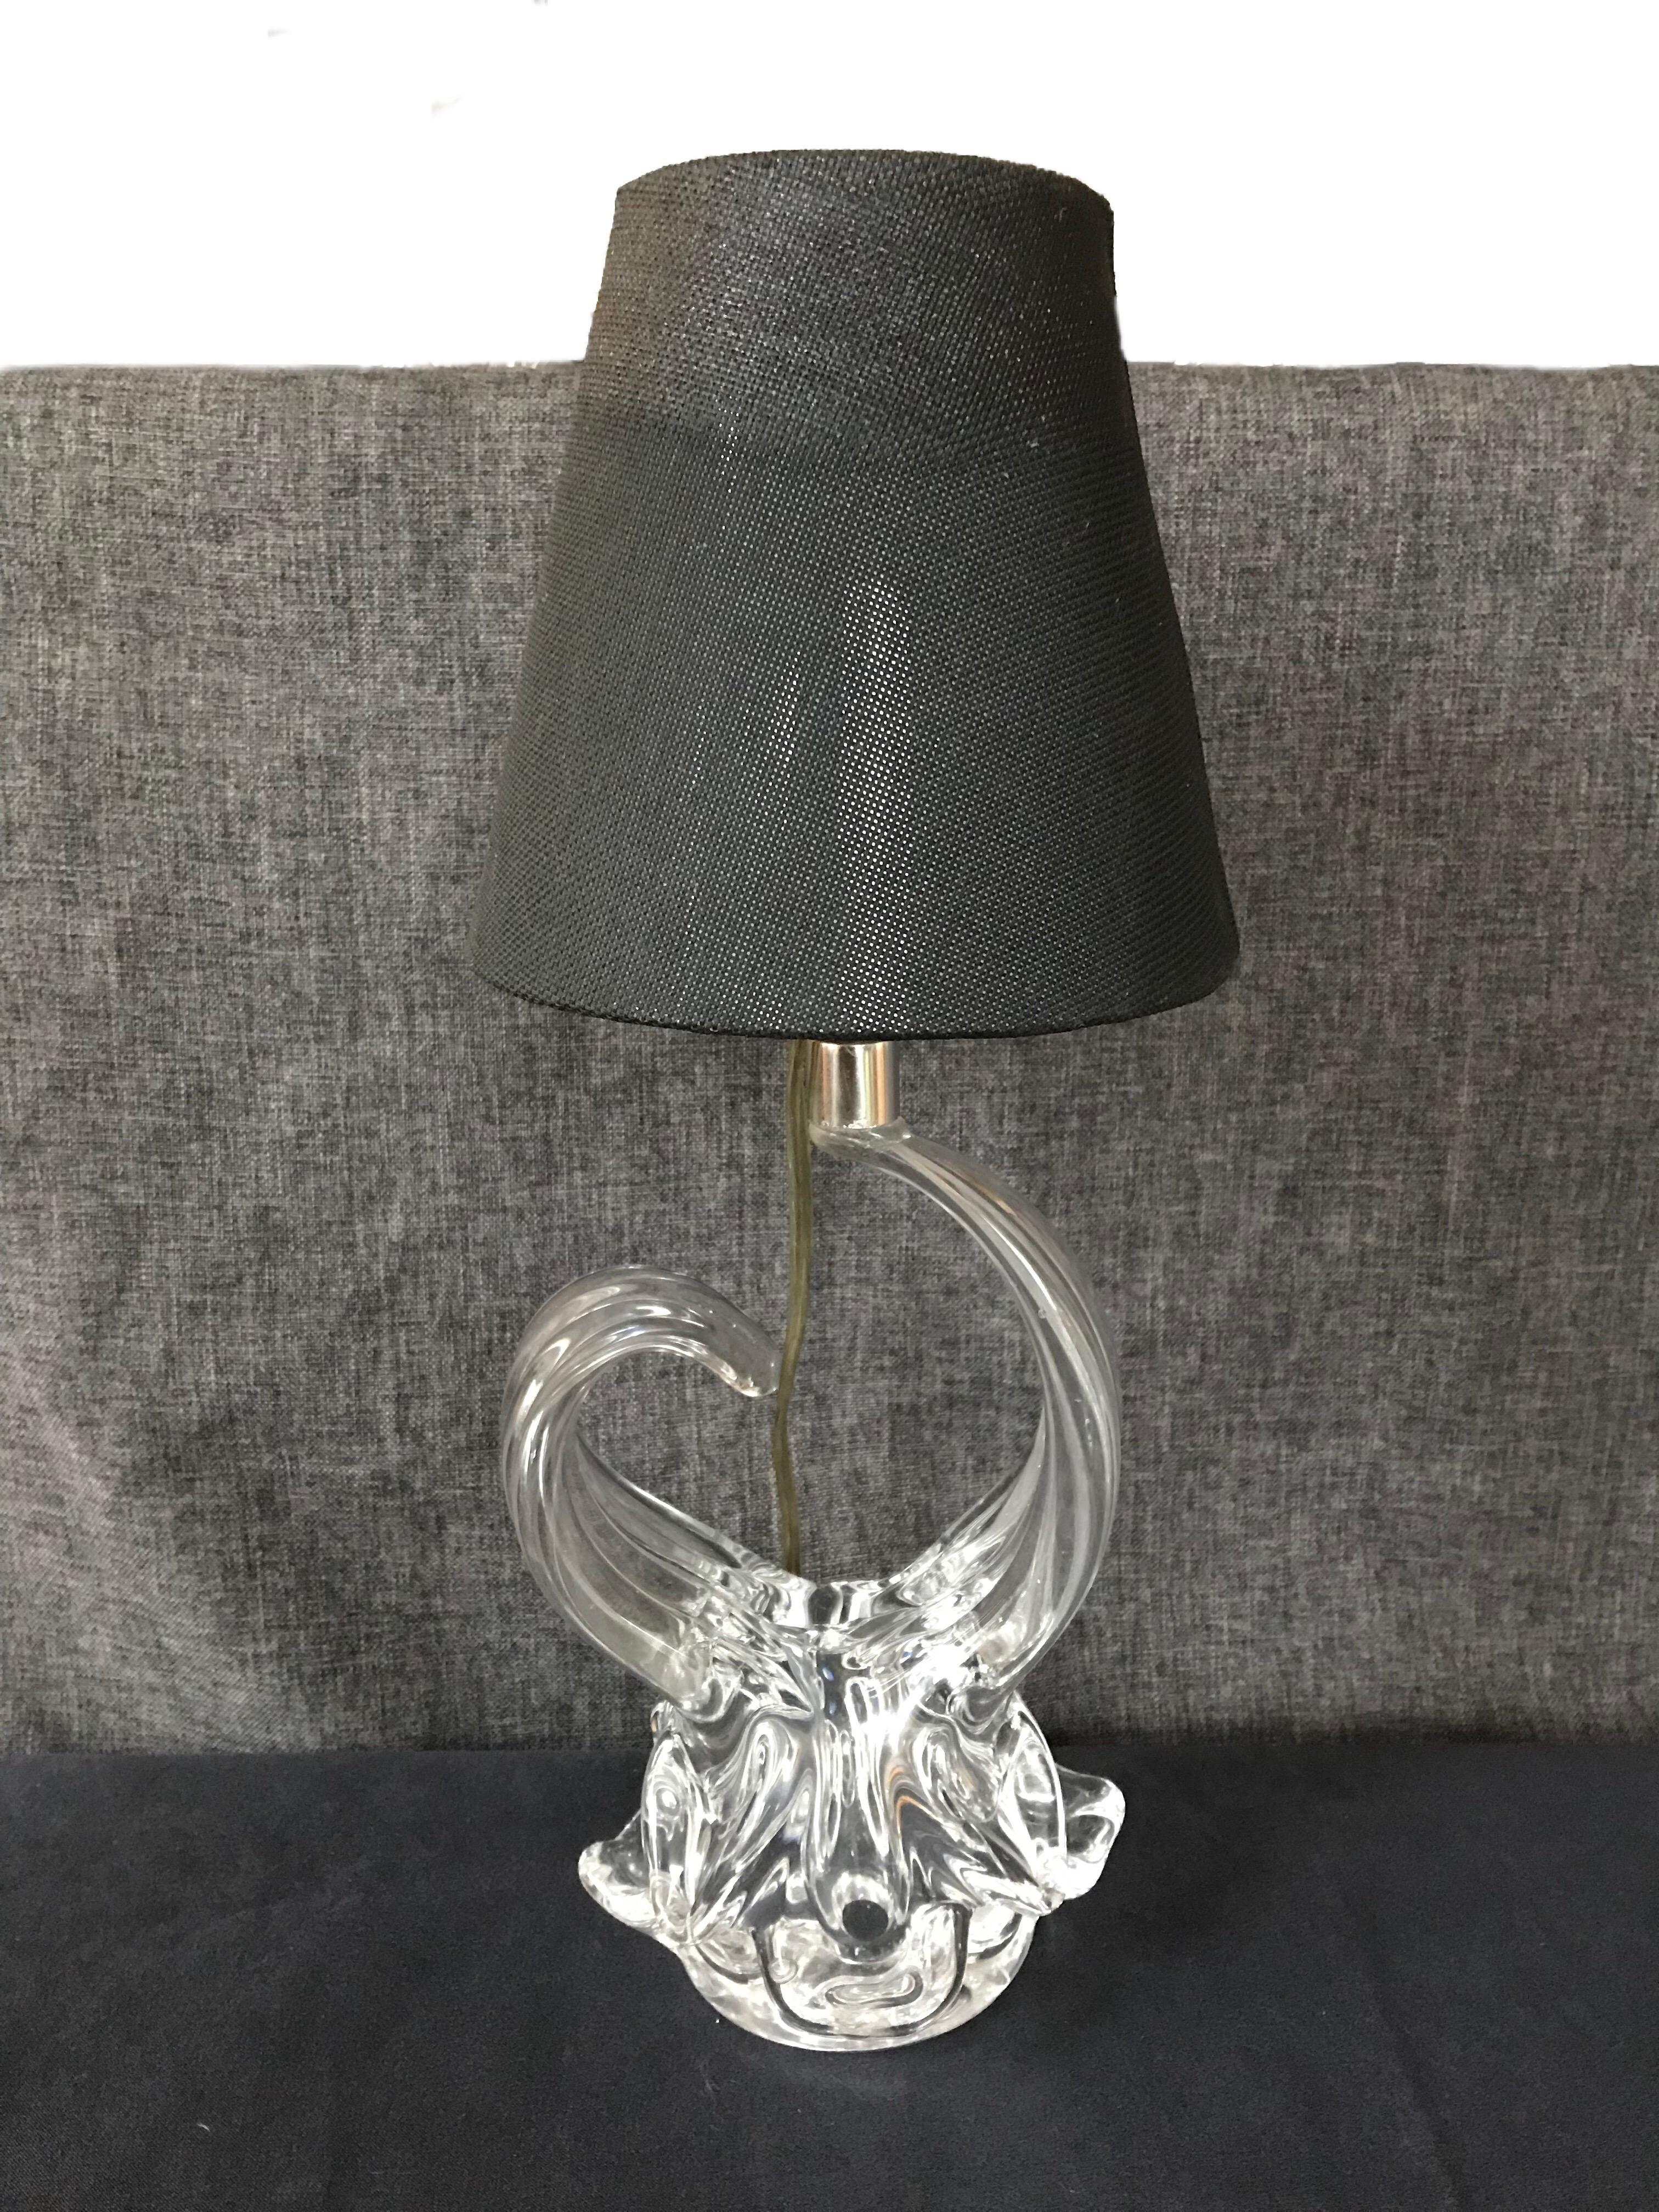 Crystal table lamp by Schneider, France 1950s.
D 14 x h 33 cm
Measures With black lampshade: 13 x P 11 x H 25.5 cm
Without lampshade D 14 x H 13 cm.